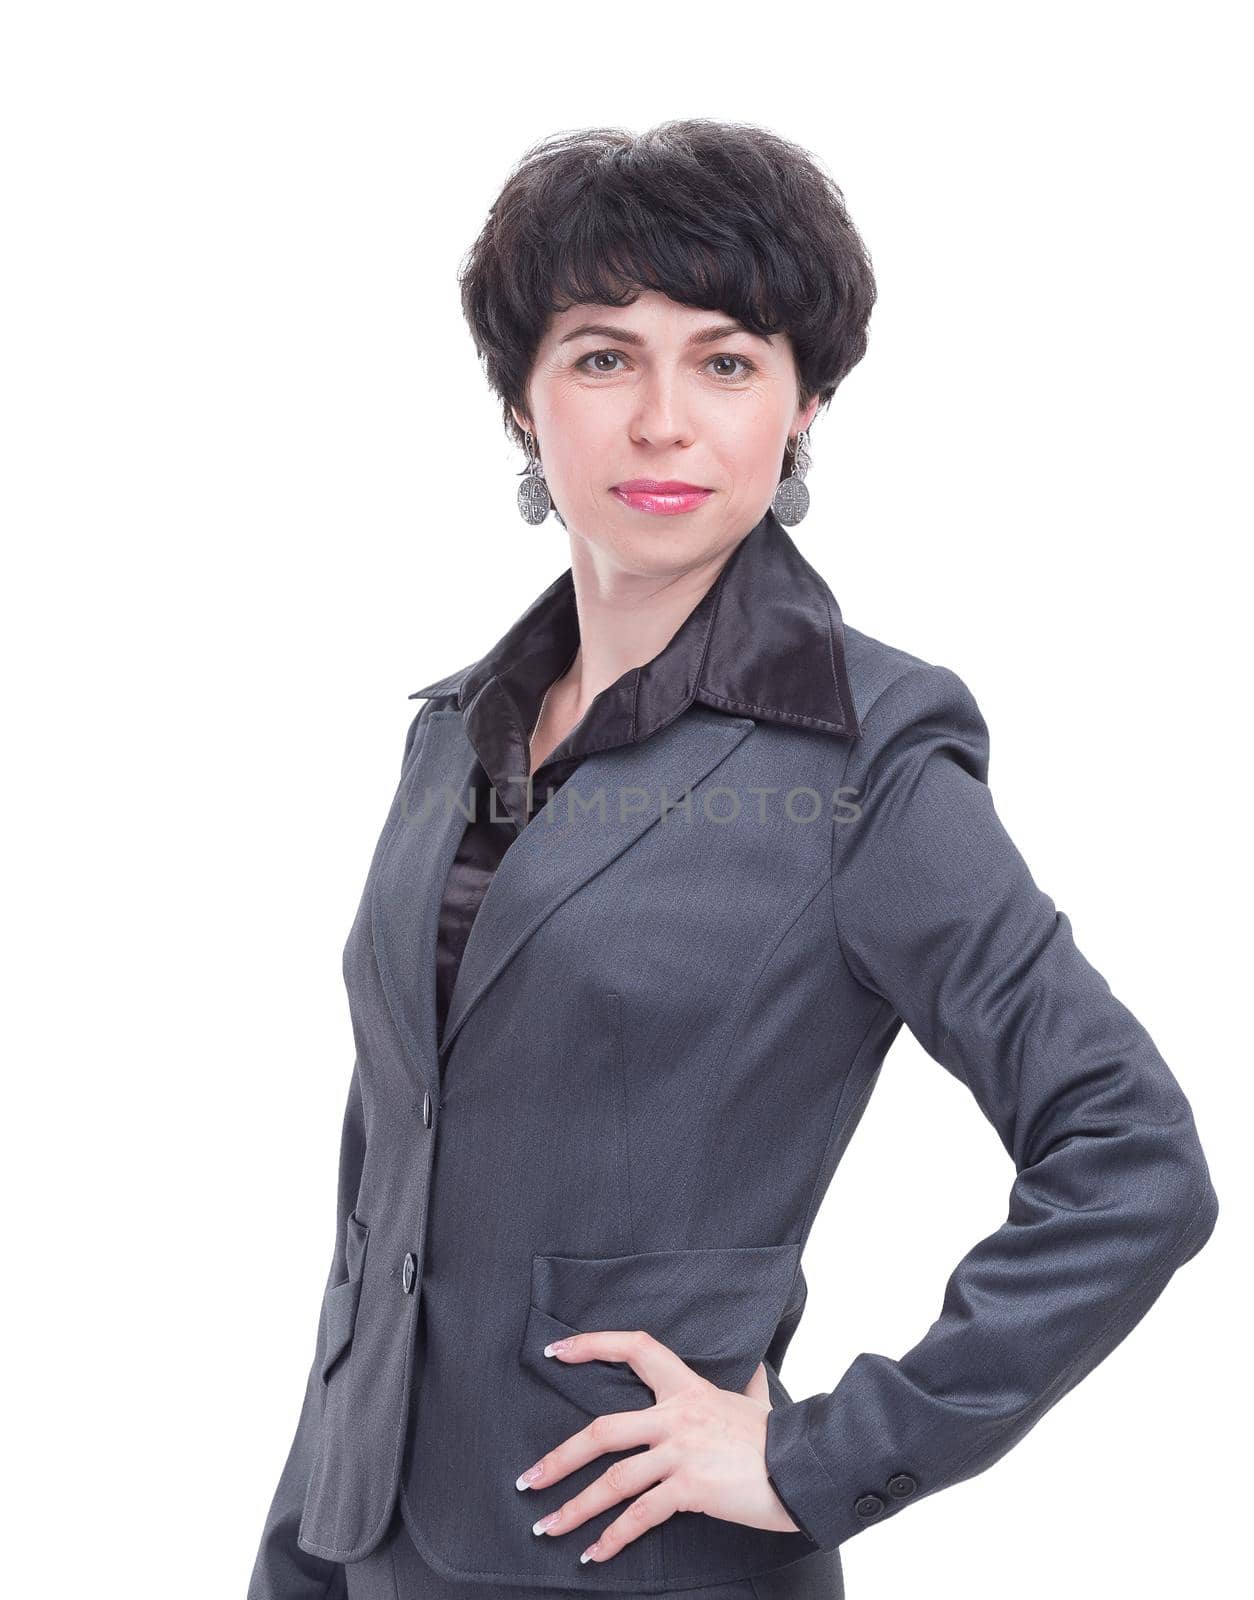 modern business woman in a business suit. isolated on white background